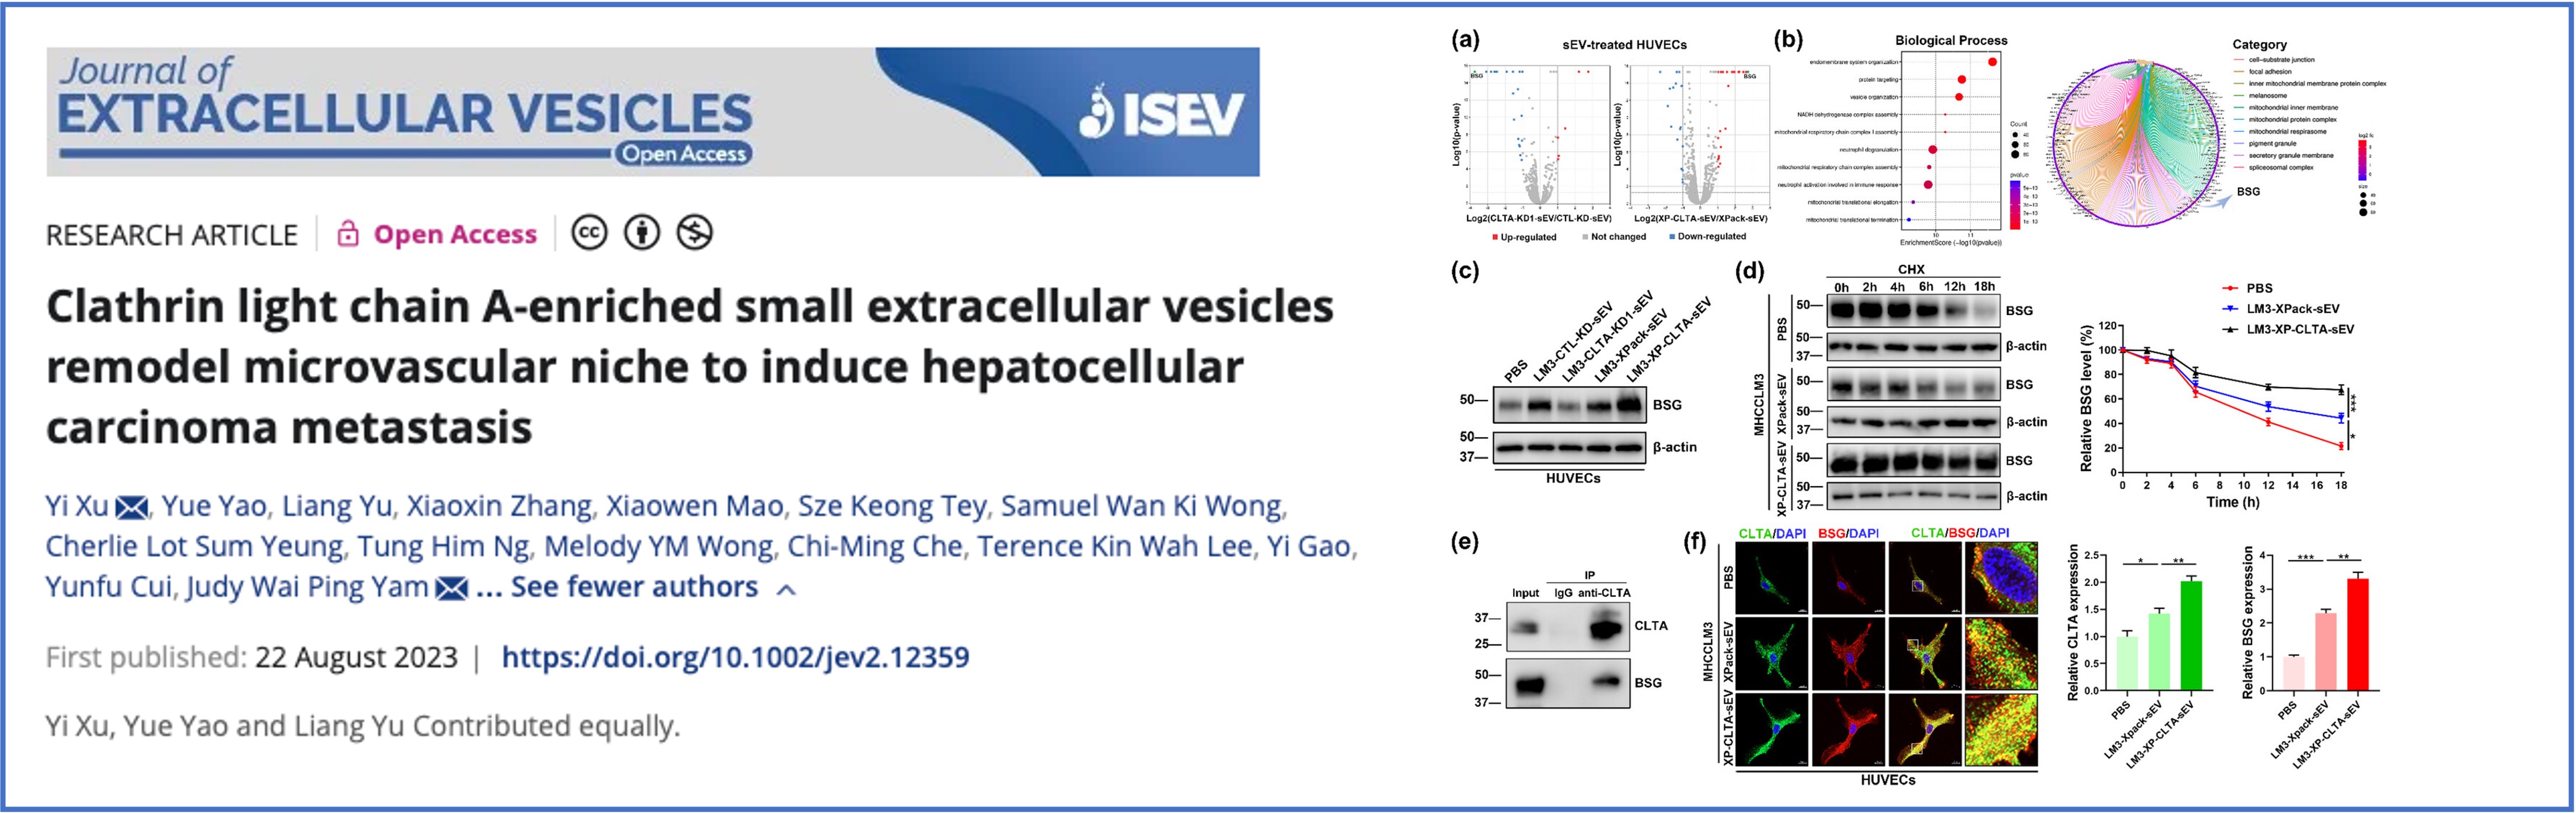 ISEV2021 Abstract Book - 2021 - Journal of Extracellular Vesicles - Wiley  Online Library